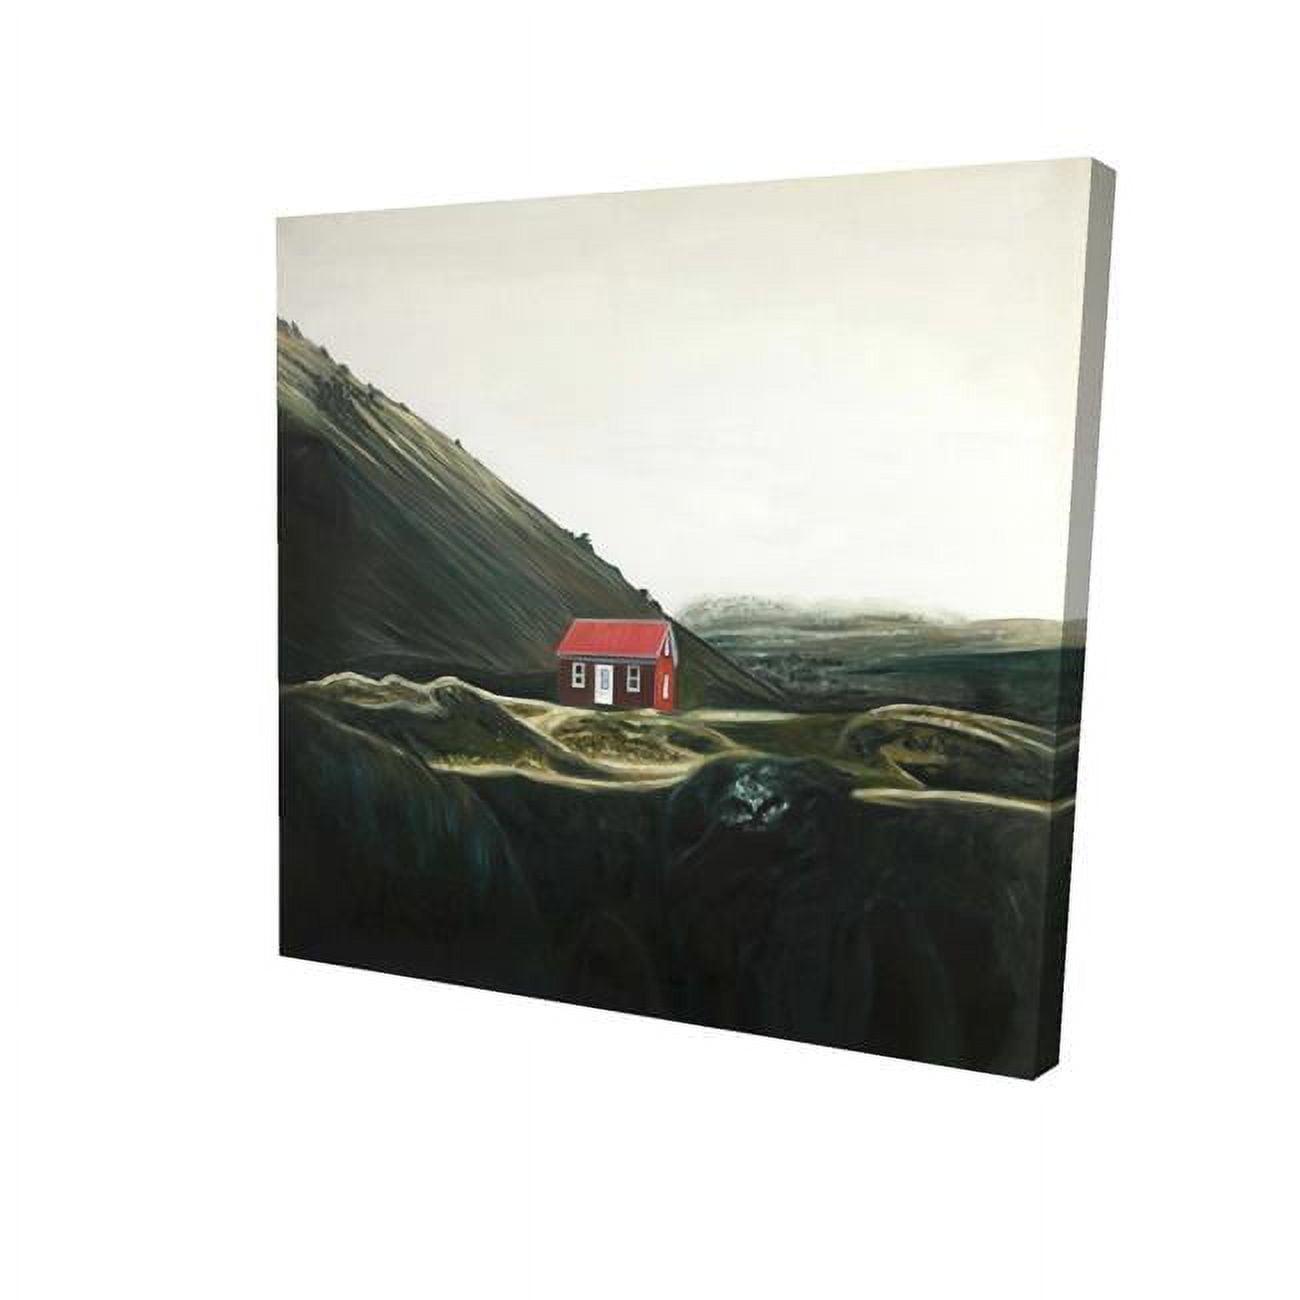 Begin Home Decor 2080-3232-LA185 32 x 32 in. Isolated Shack-Print on Canvas